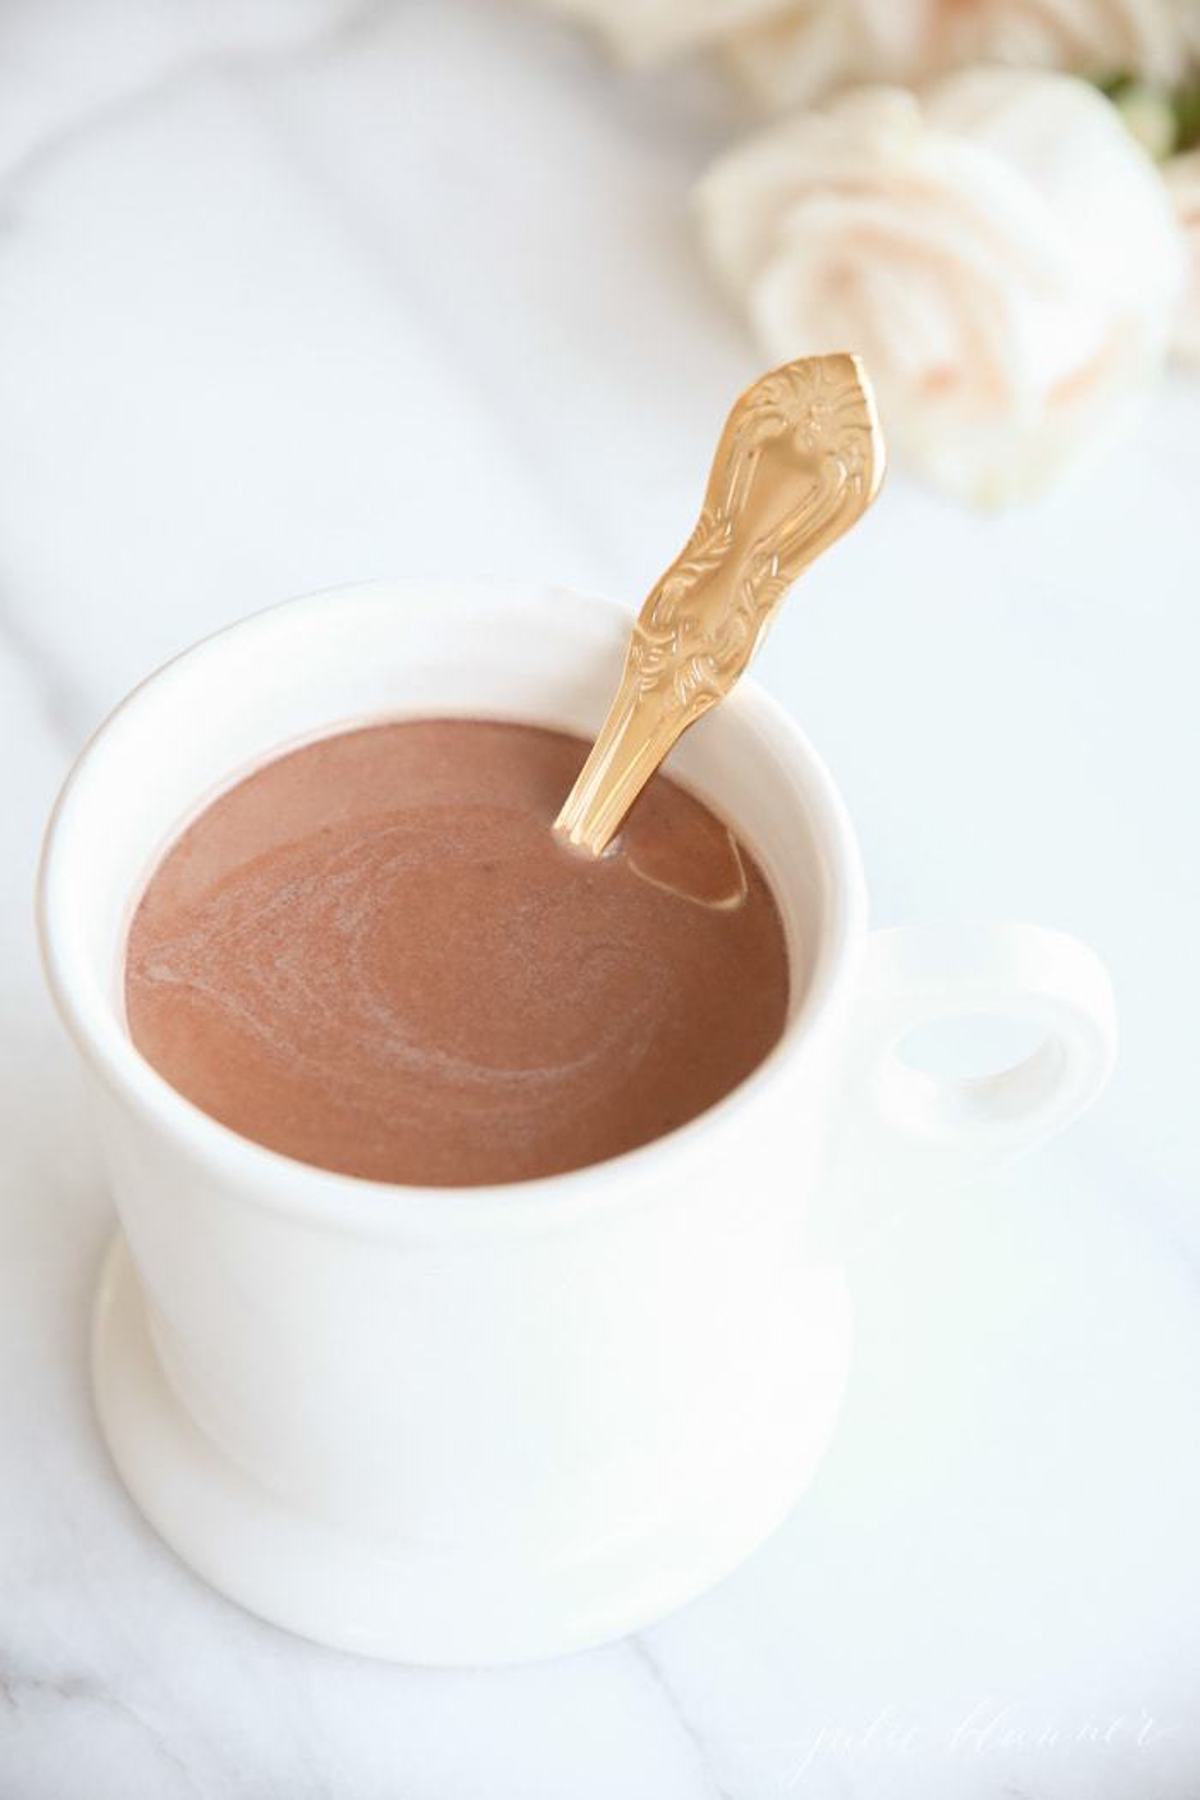 hot chocolate in a white mug, with a gold spoon for stirring